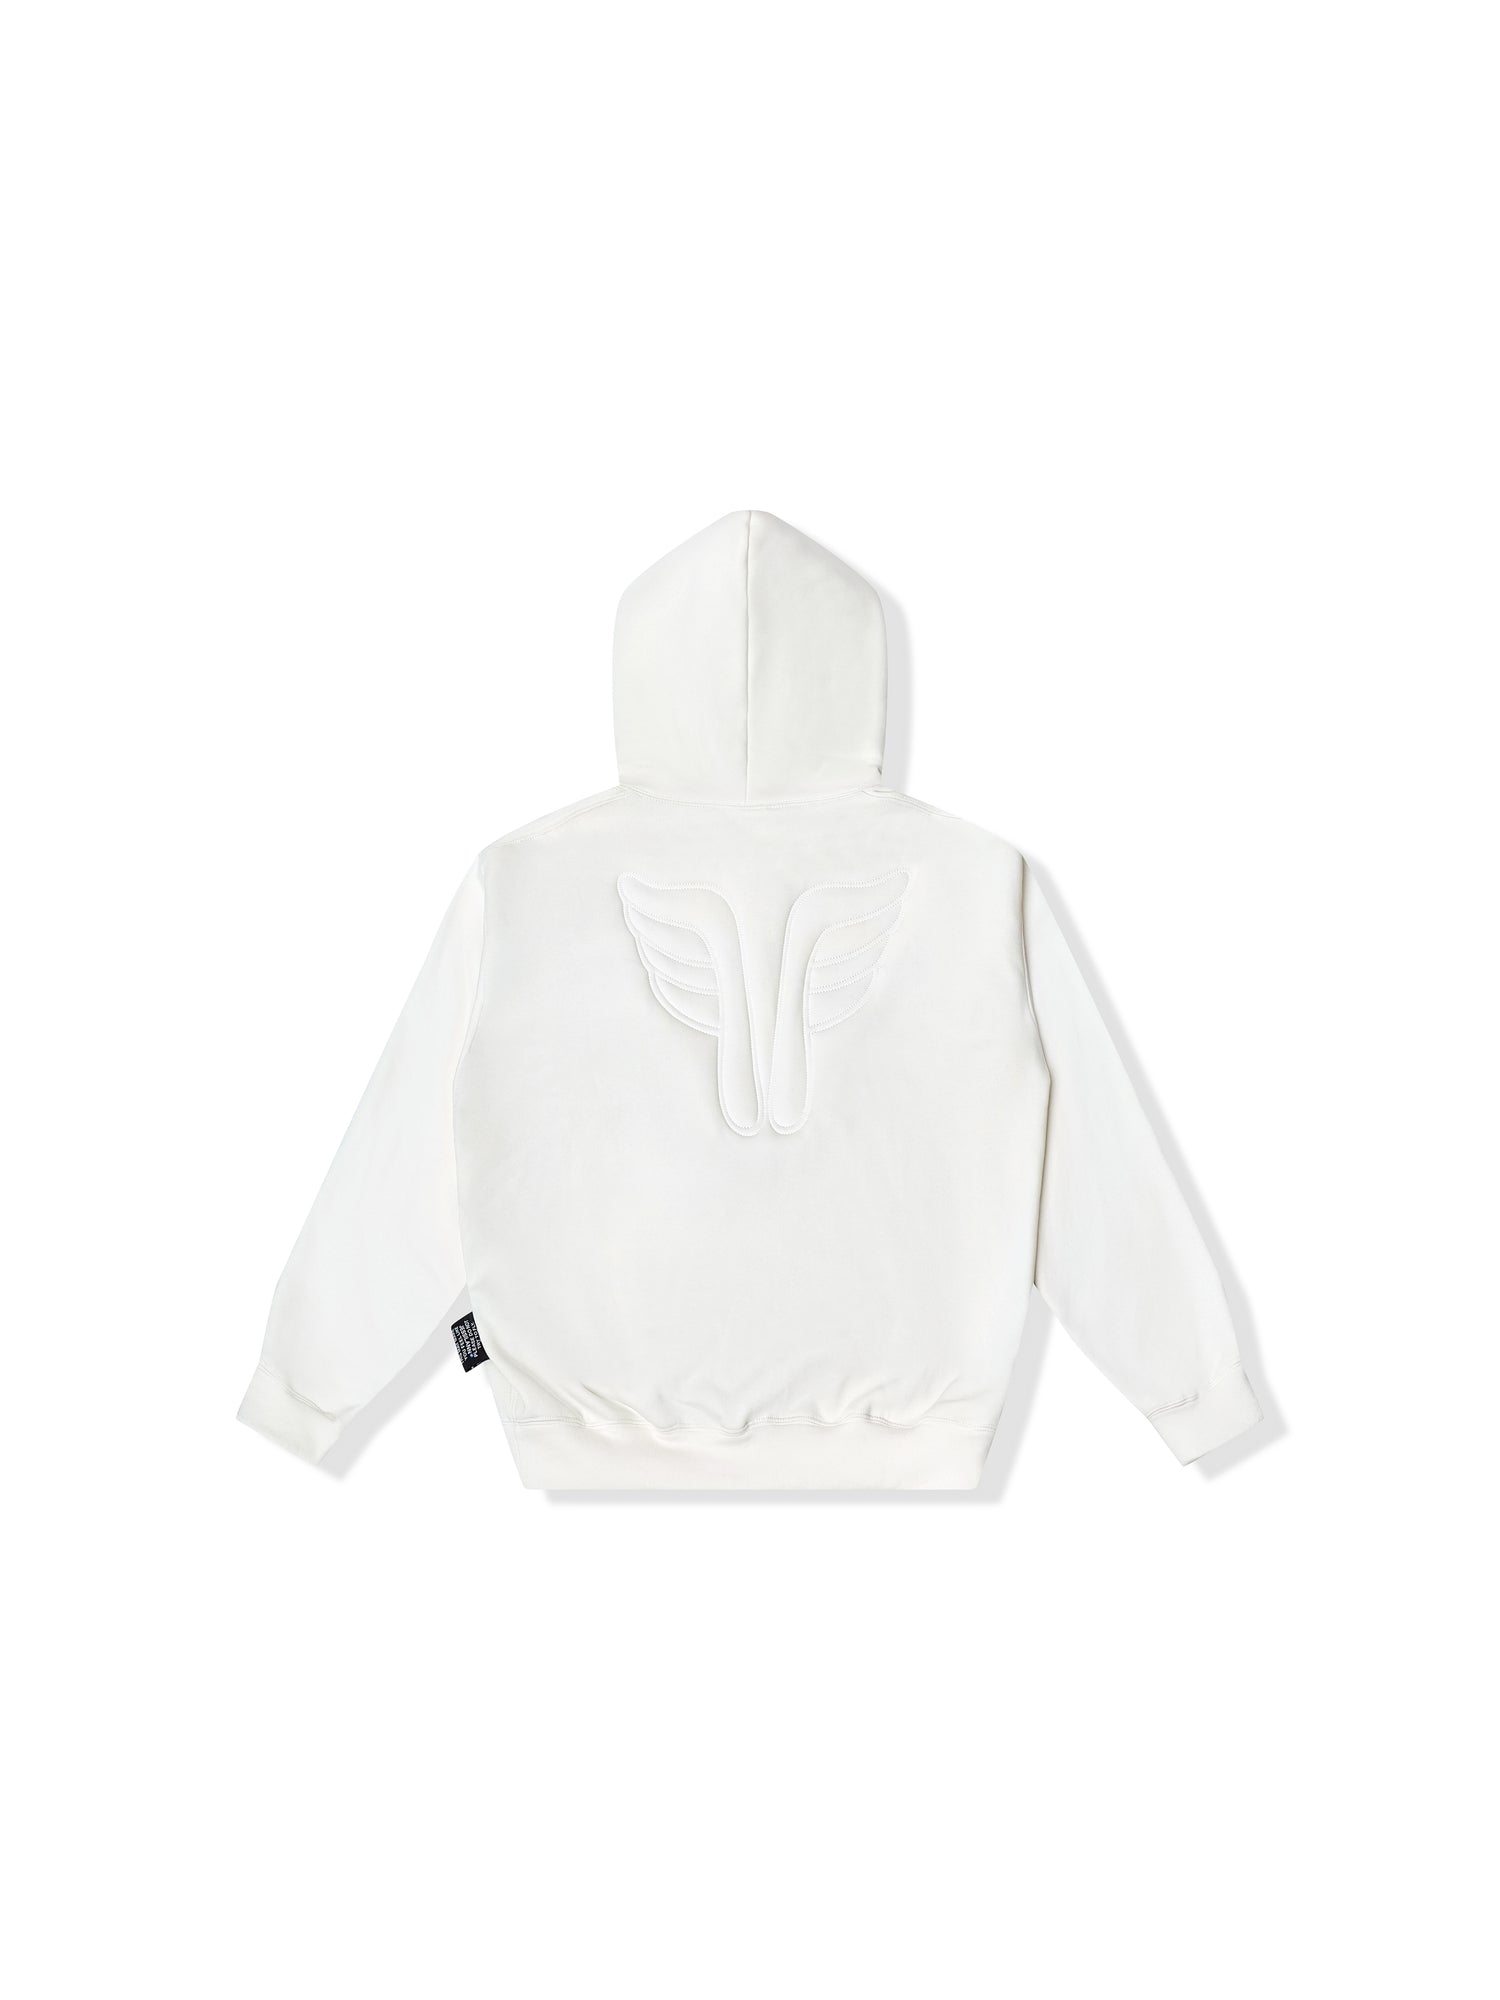 HOODIE OVERSIZE ANGEL COUTURE WHITE